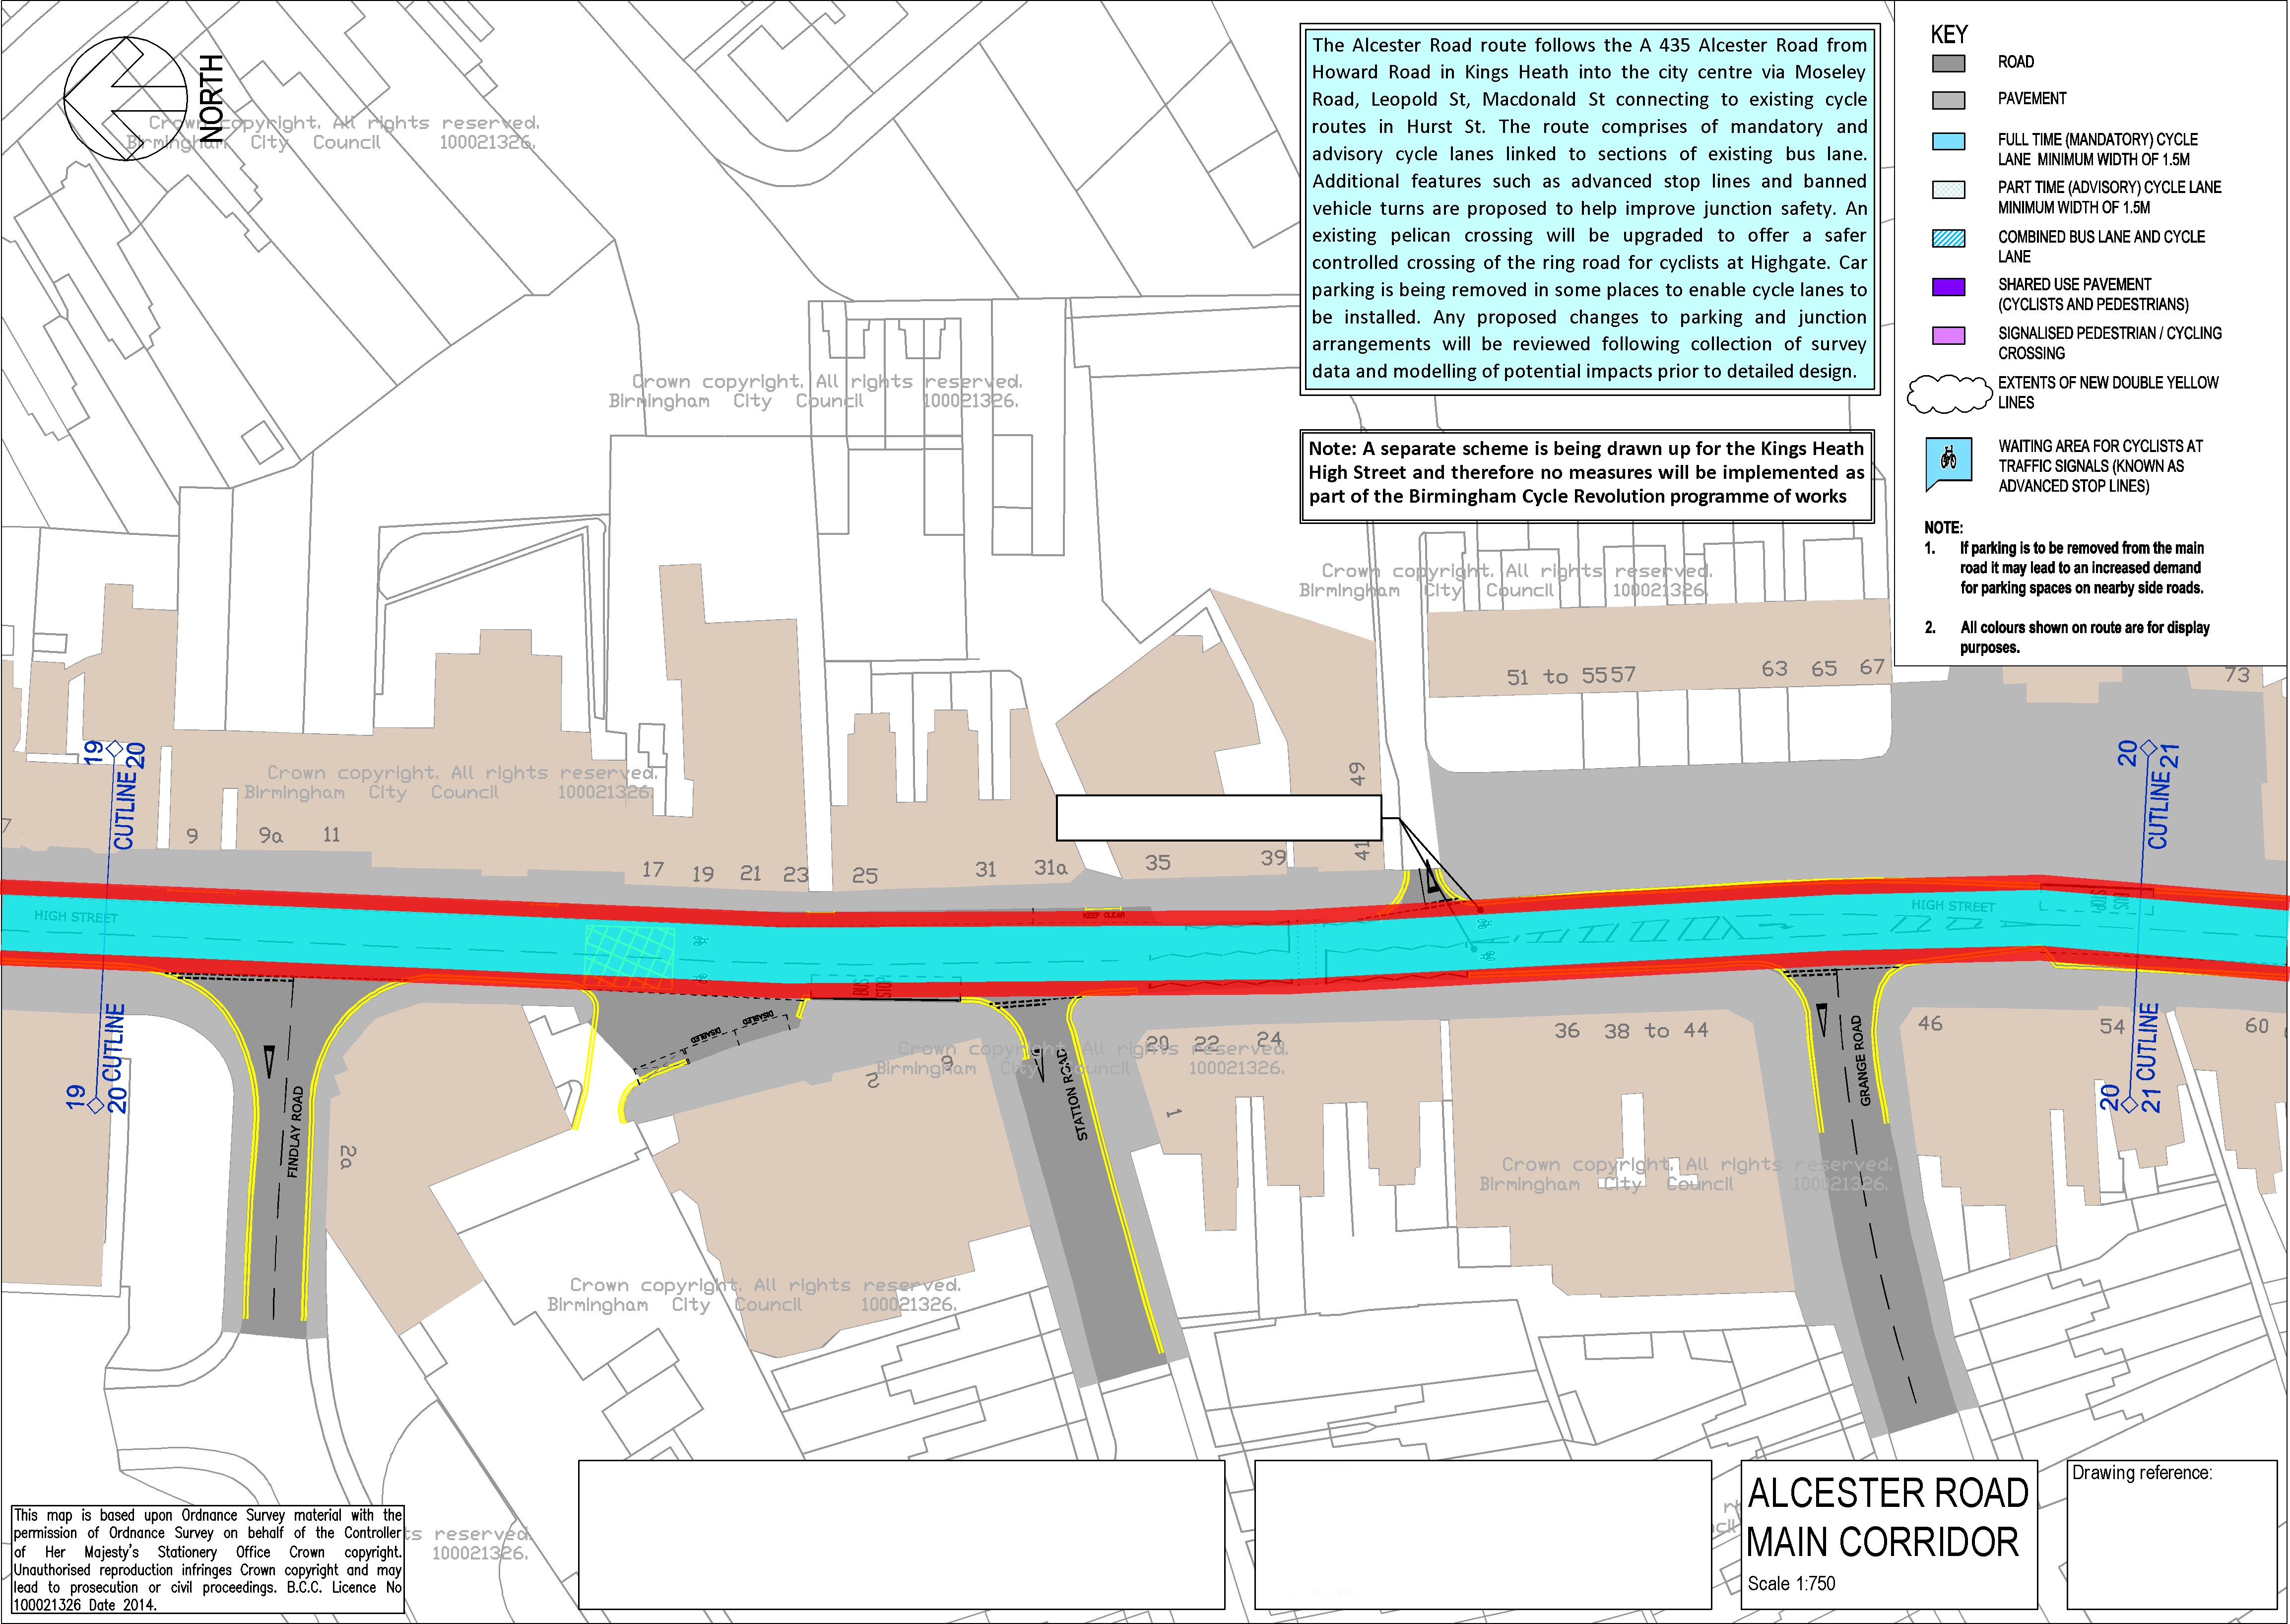 Push Bikes proposal for Kings Heath (section 2)